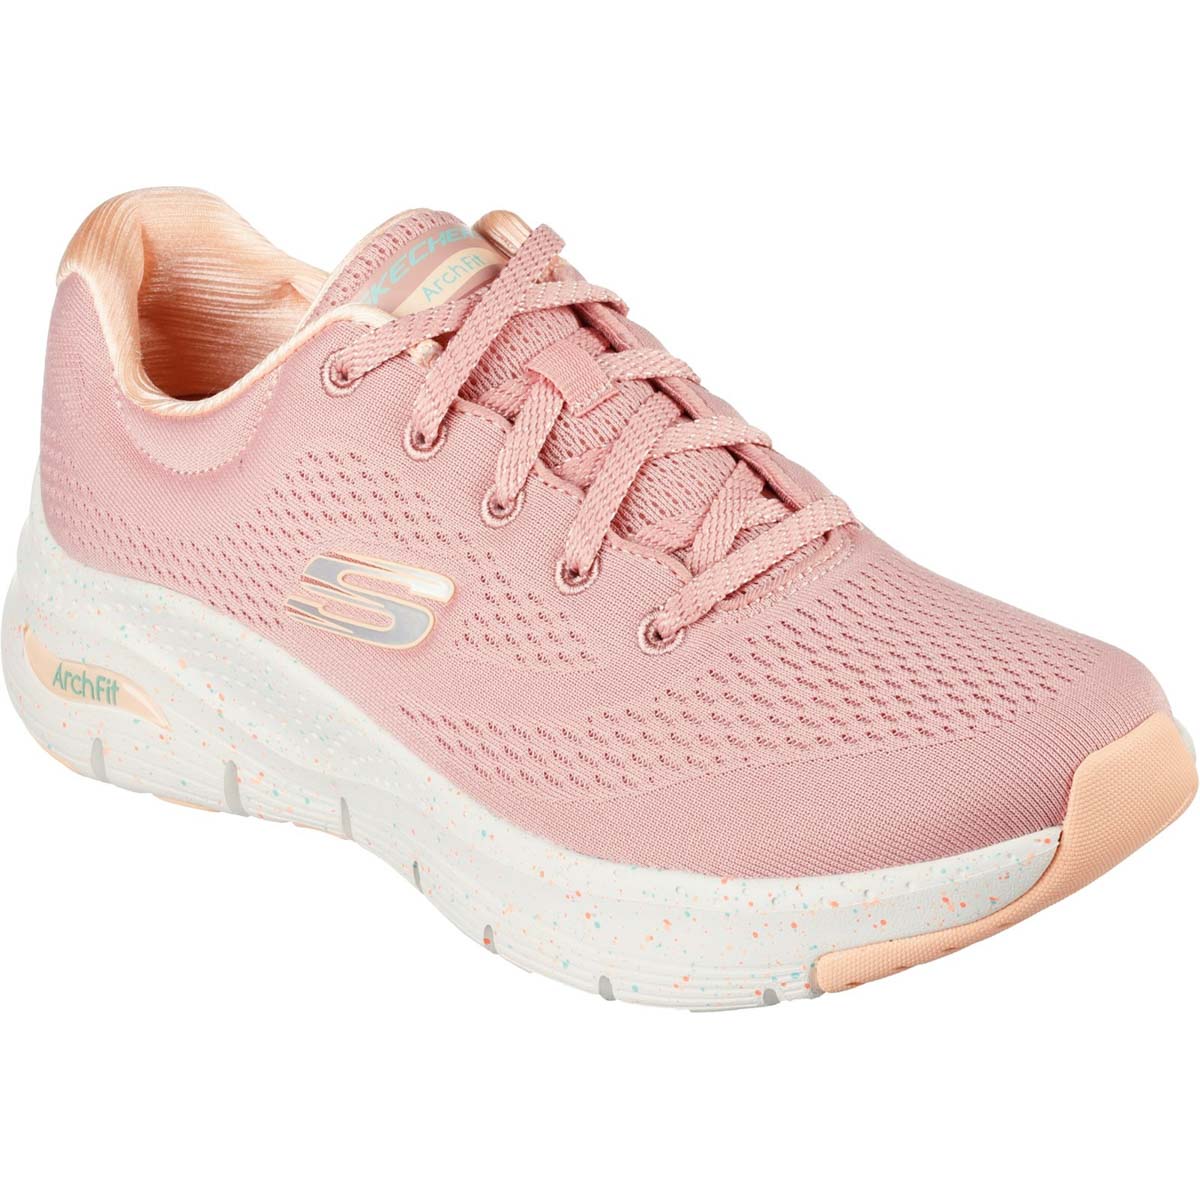 Skechers Arch Fit Freckle Me Pink Womens Trainers 149566 In Size 8 In Plain Pink